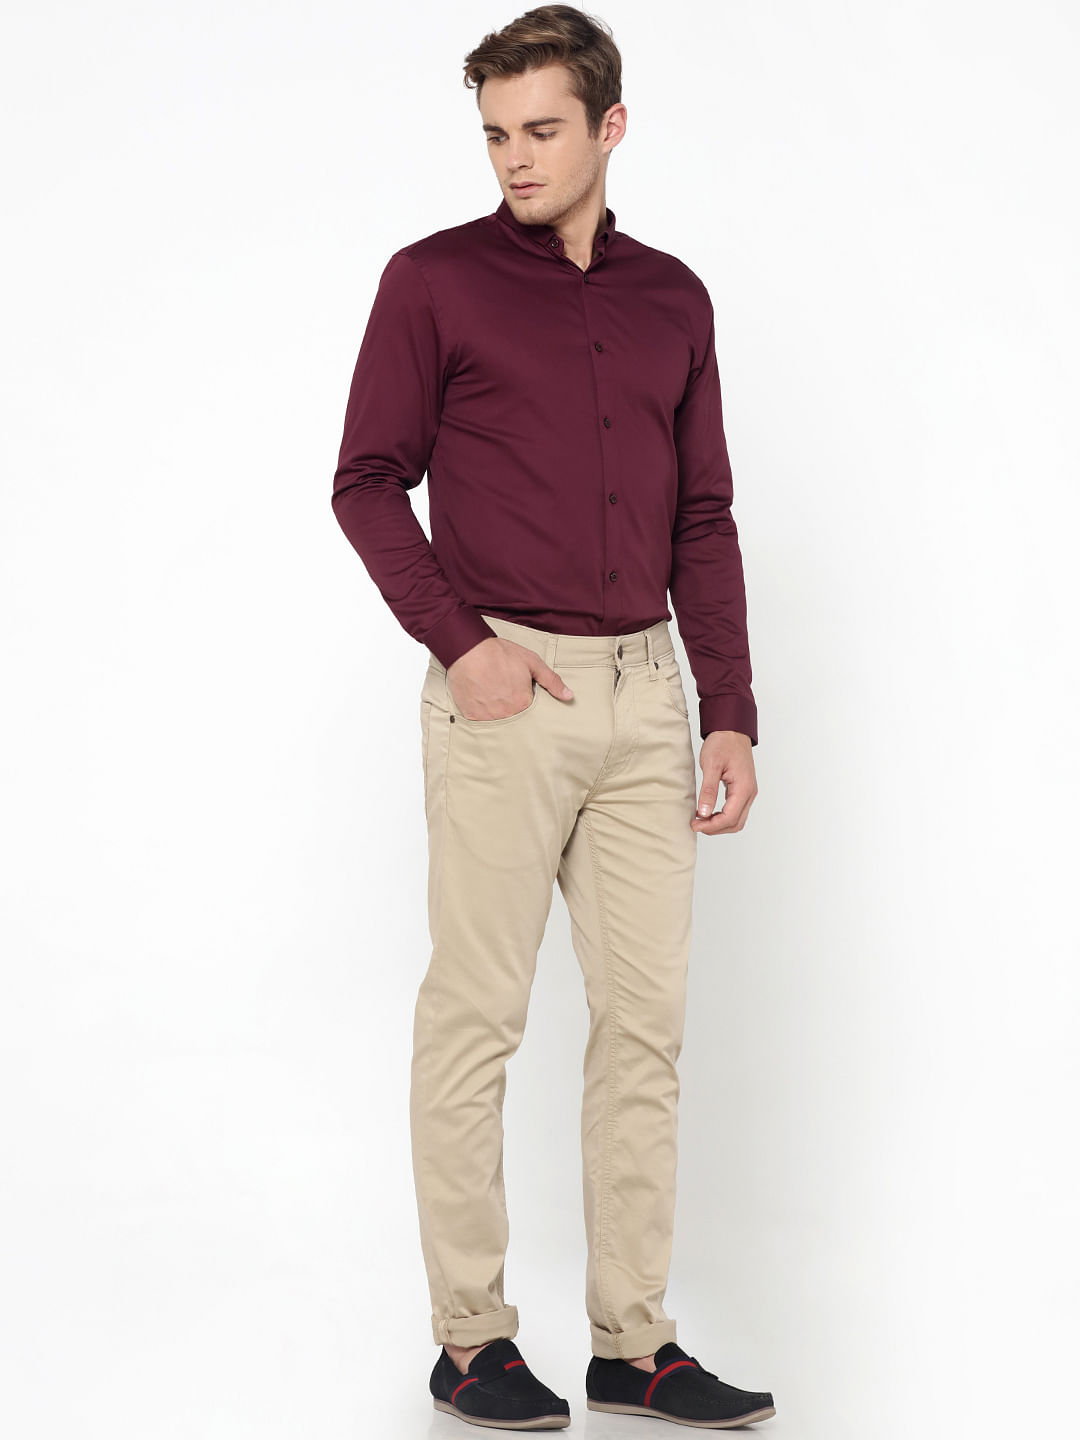 Buy Park Avenue Maroon Cotton Blend Slim Fit Shirt at Amazon.in